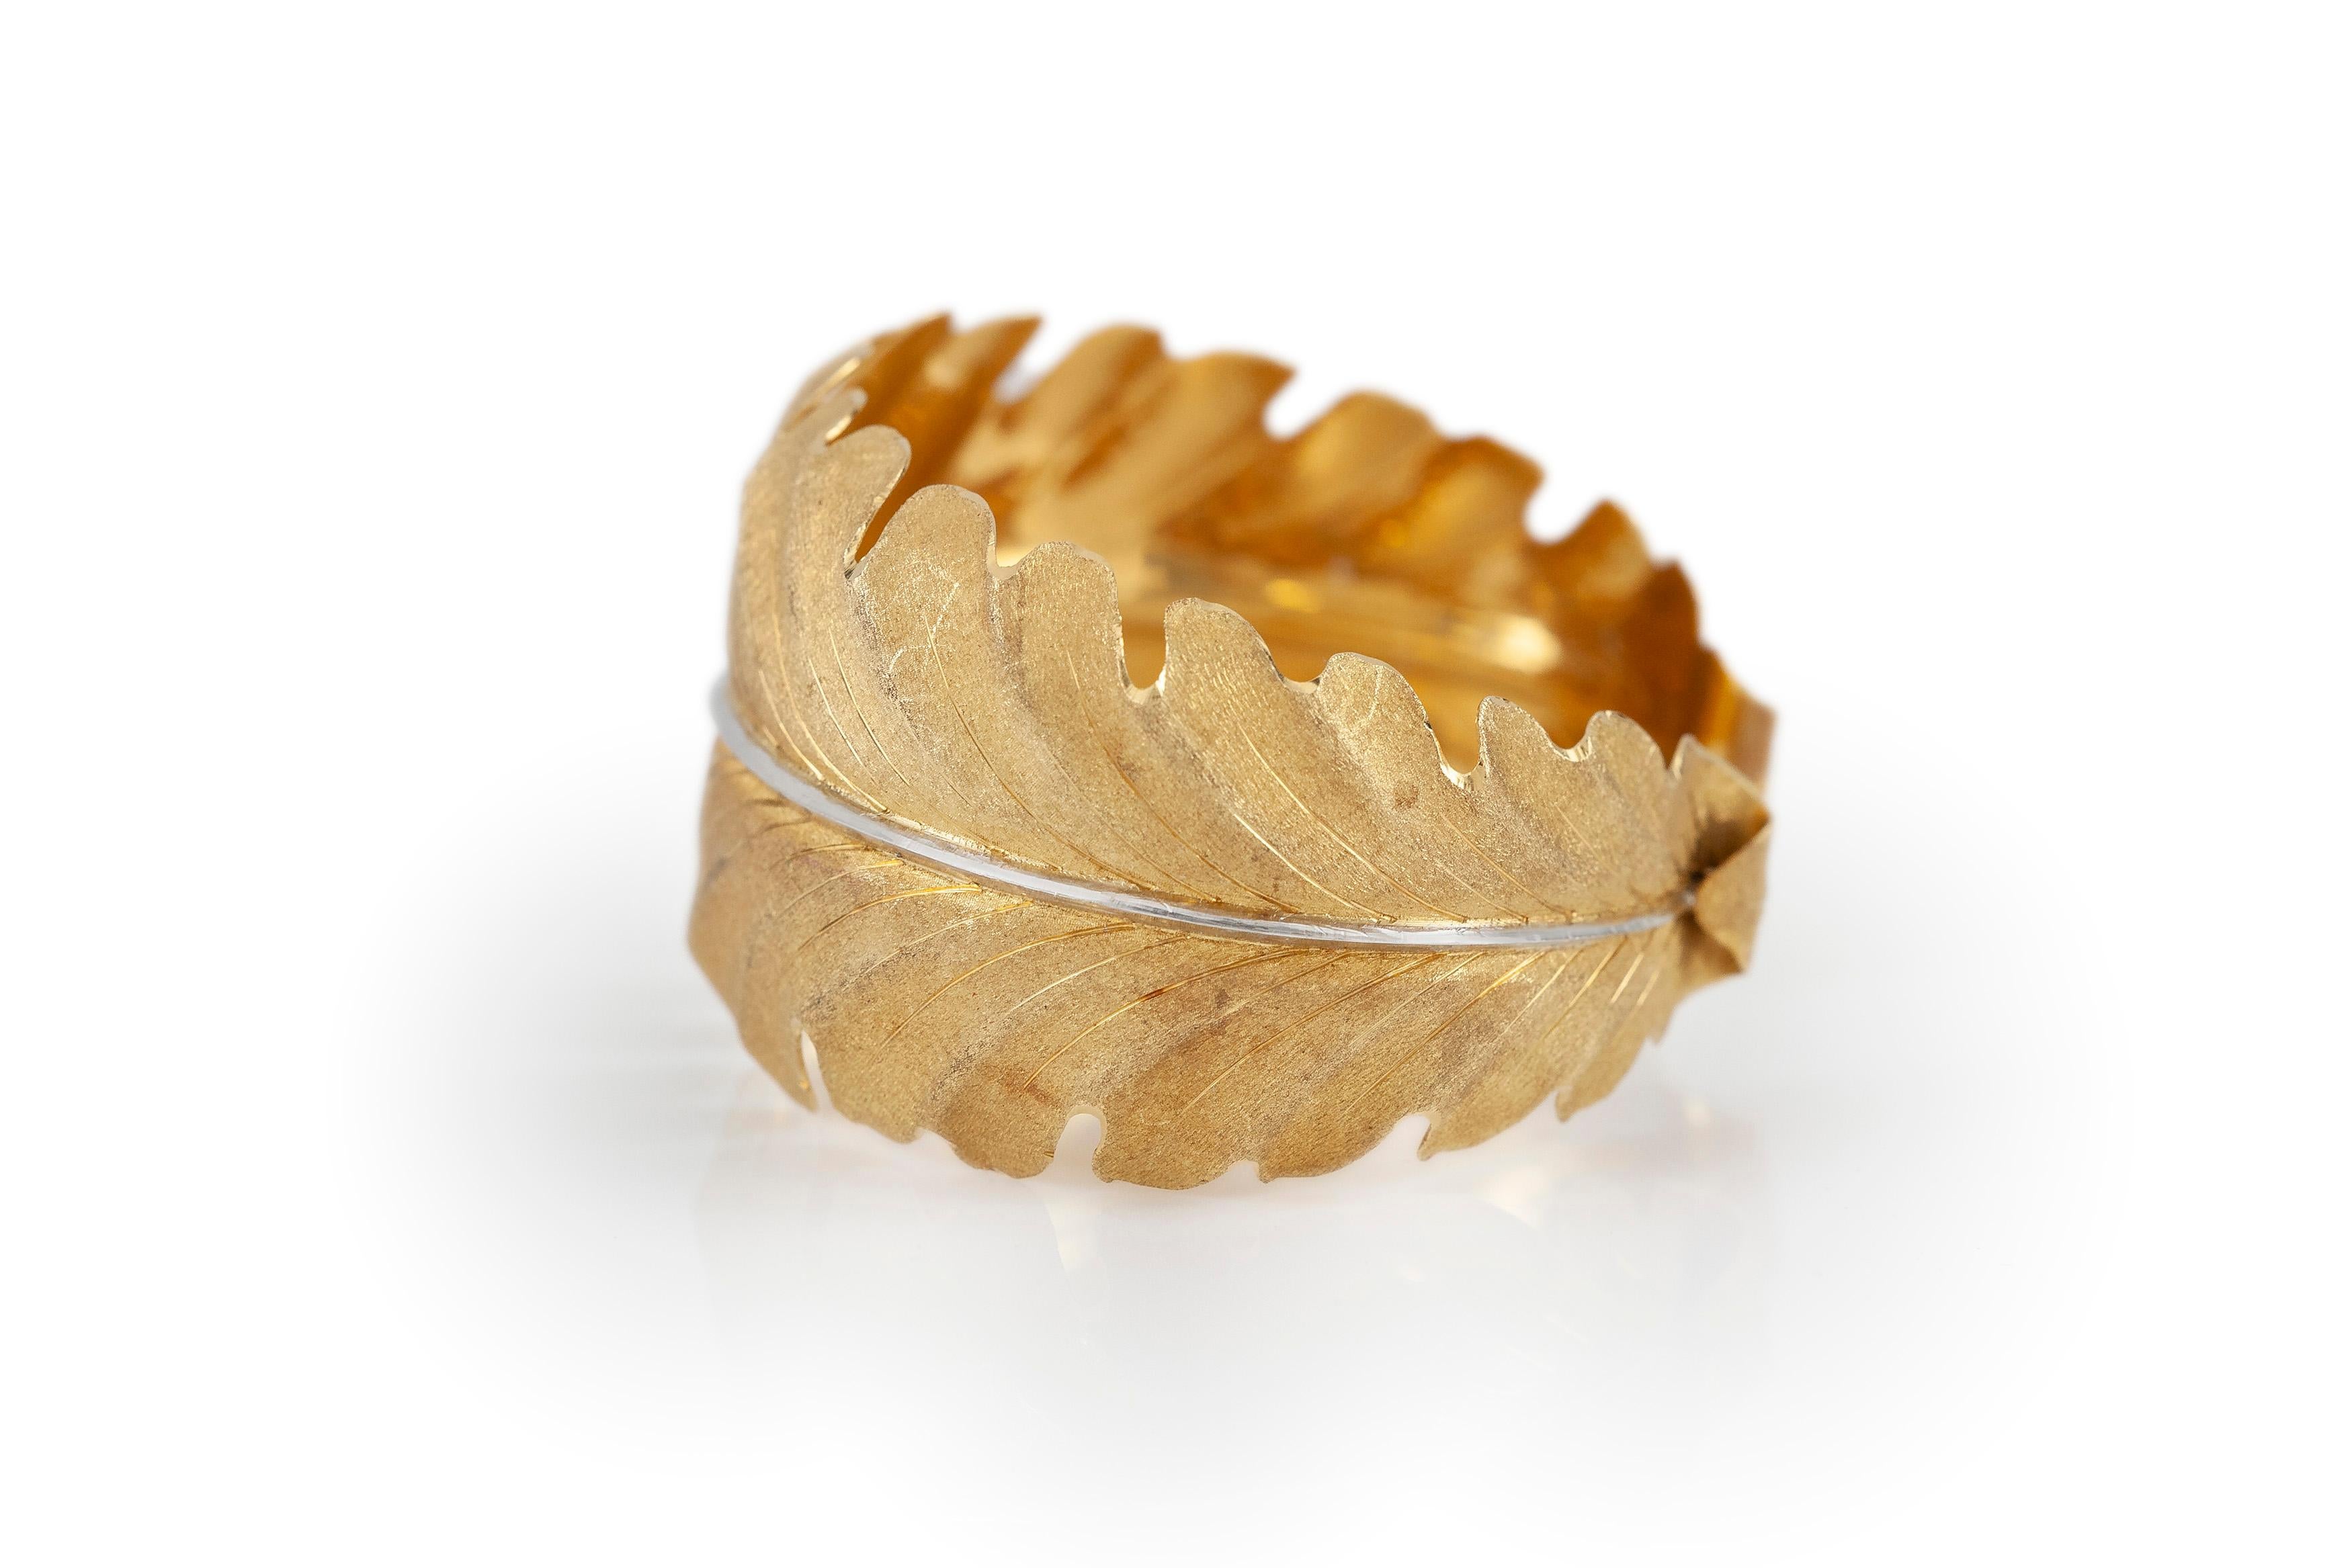 The bracelet is finely crafted in 18k yellow gold with beautiful design of leafs.

Sign by Buccellati